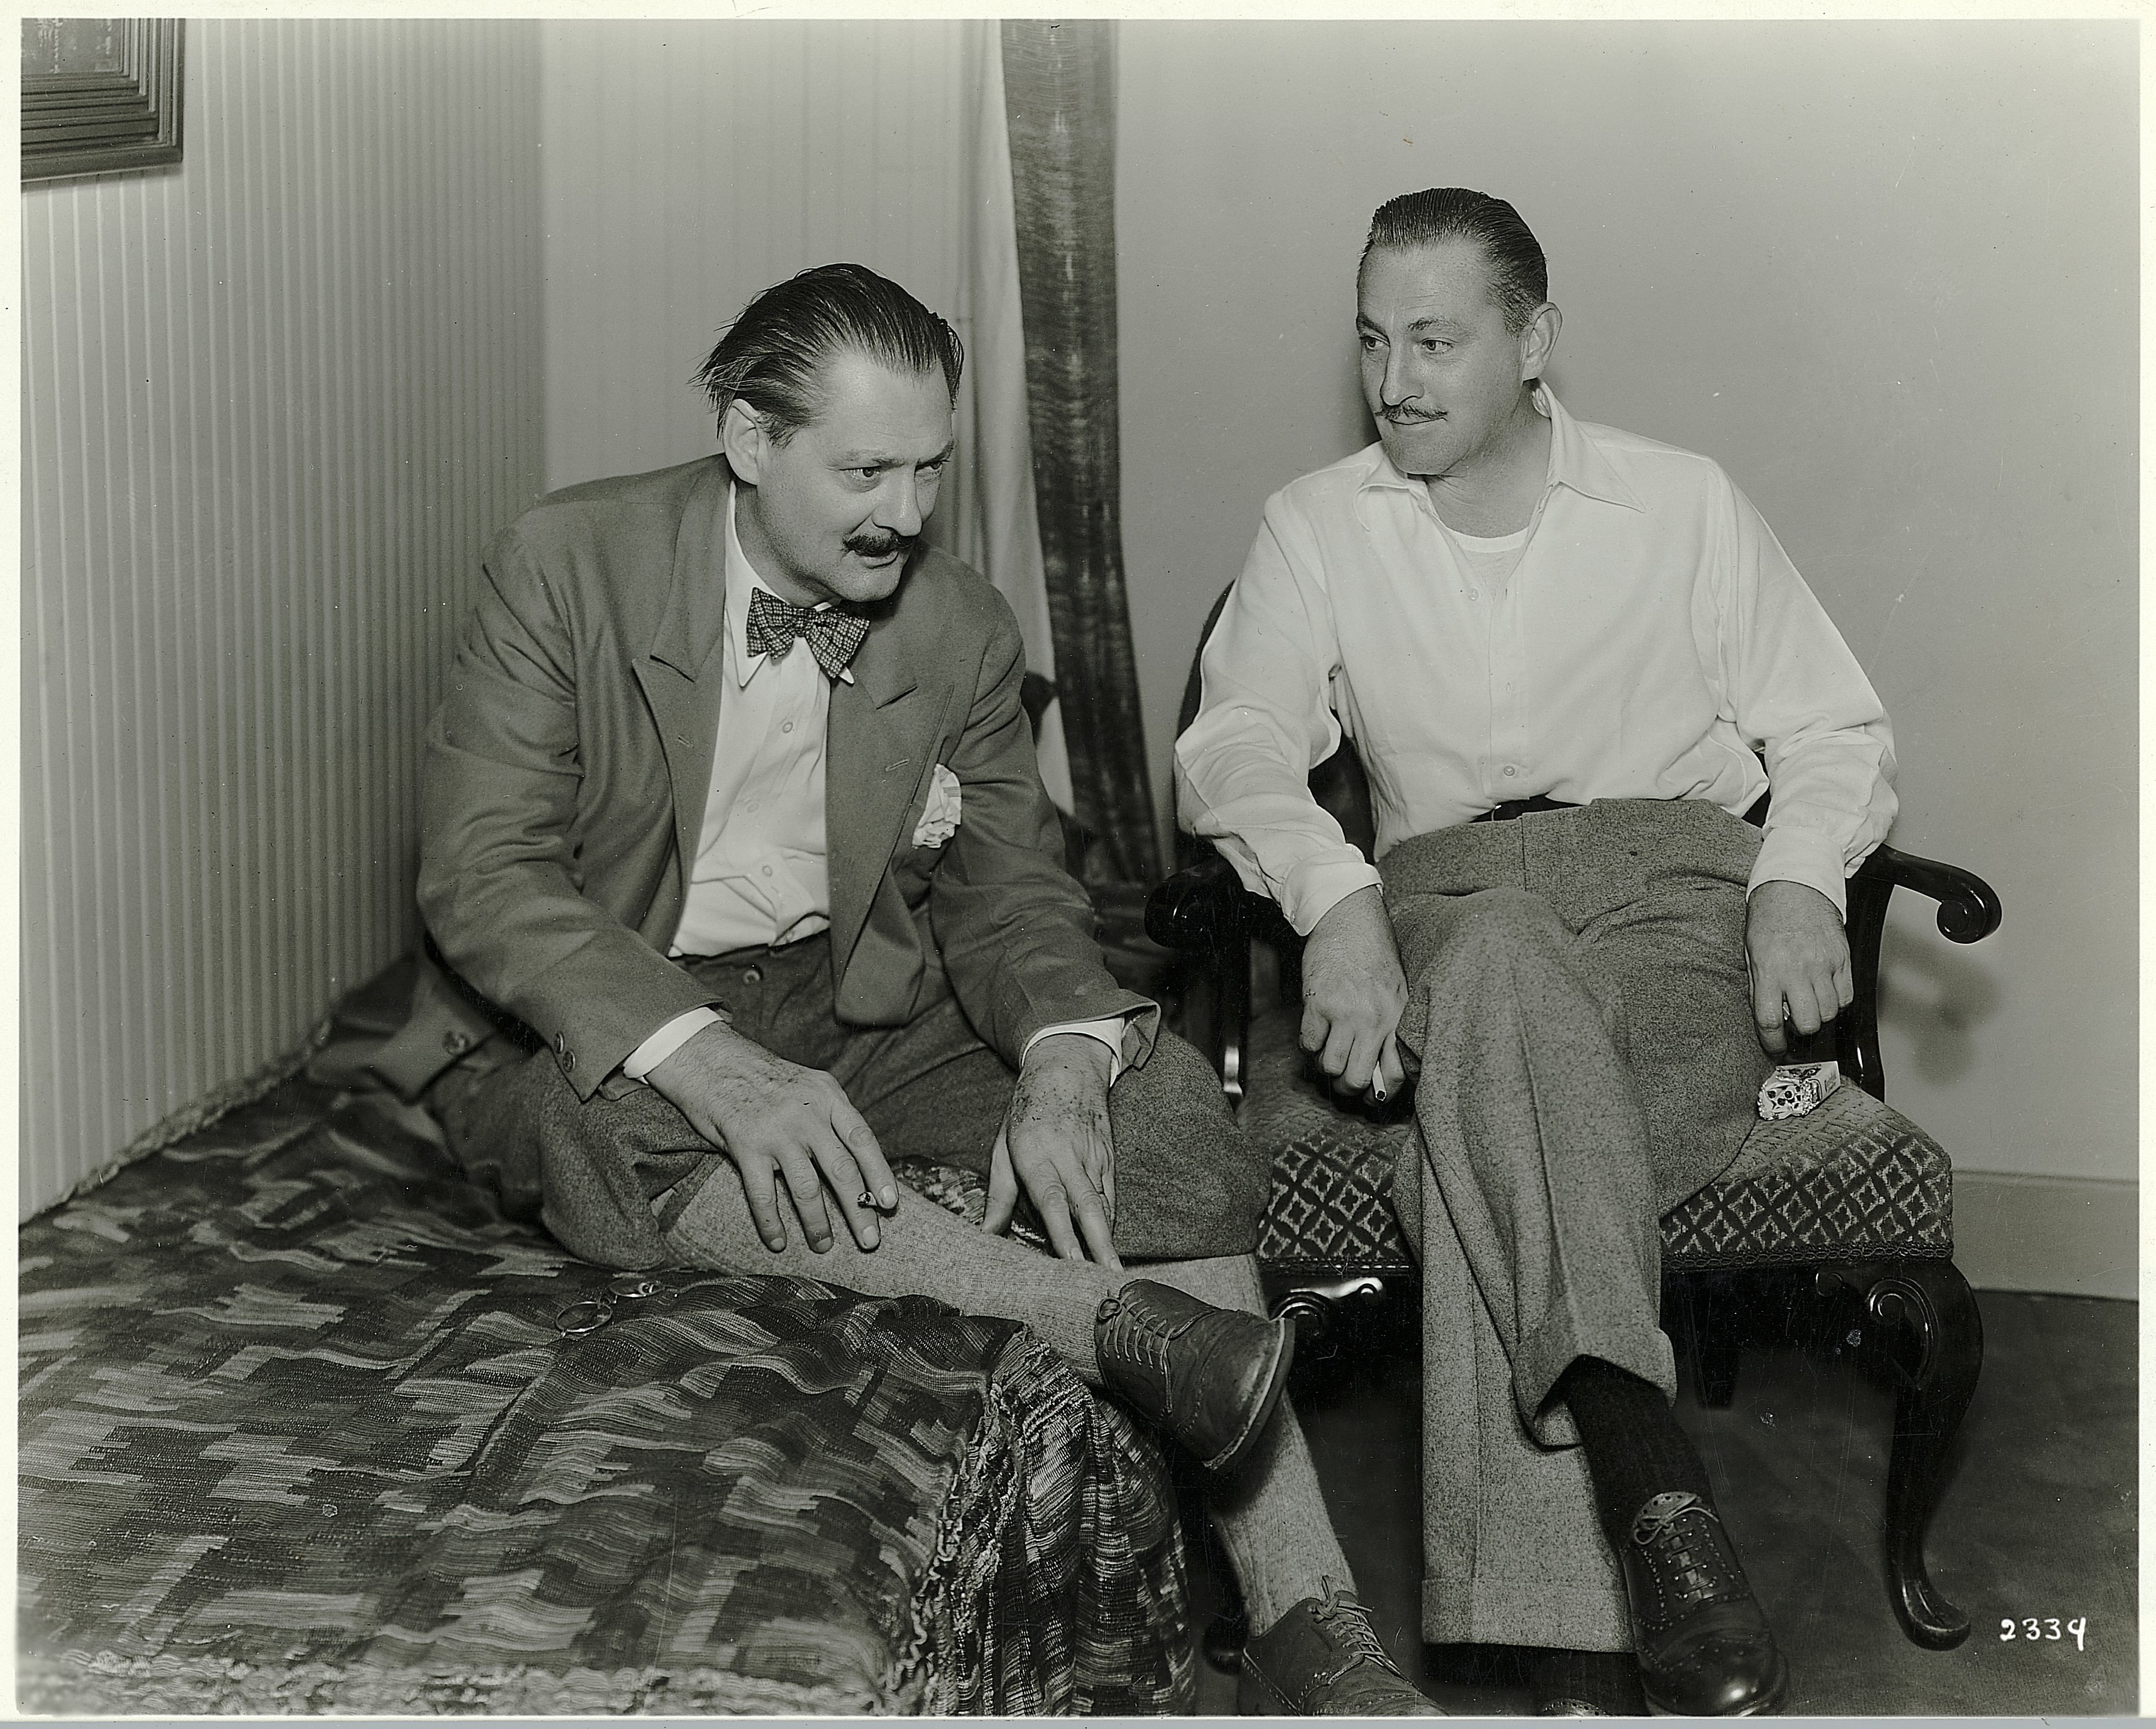 Photo of Lionel and John Sr. Barrymore | Source: Getty Images